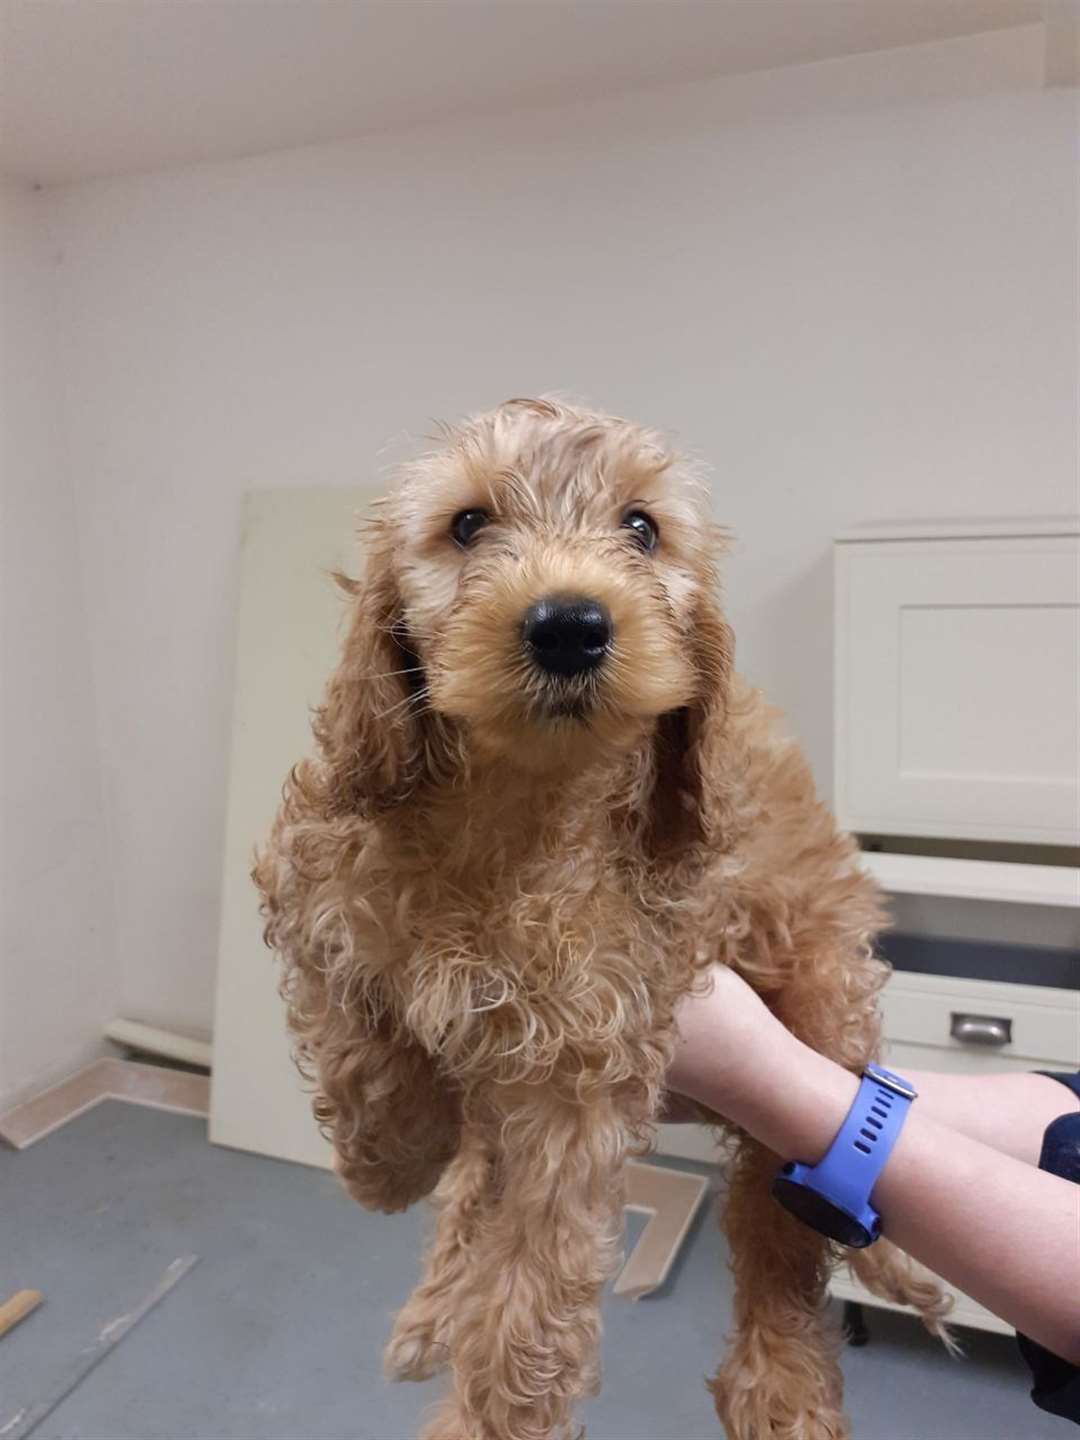 Safe now – one of the four cockapoo-type puppies that had been dumped in a bush at the side of the road.